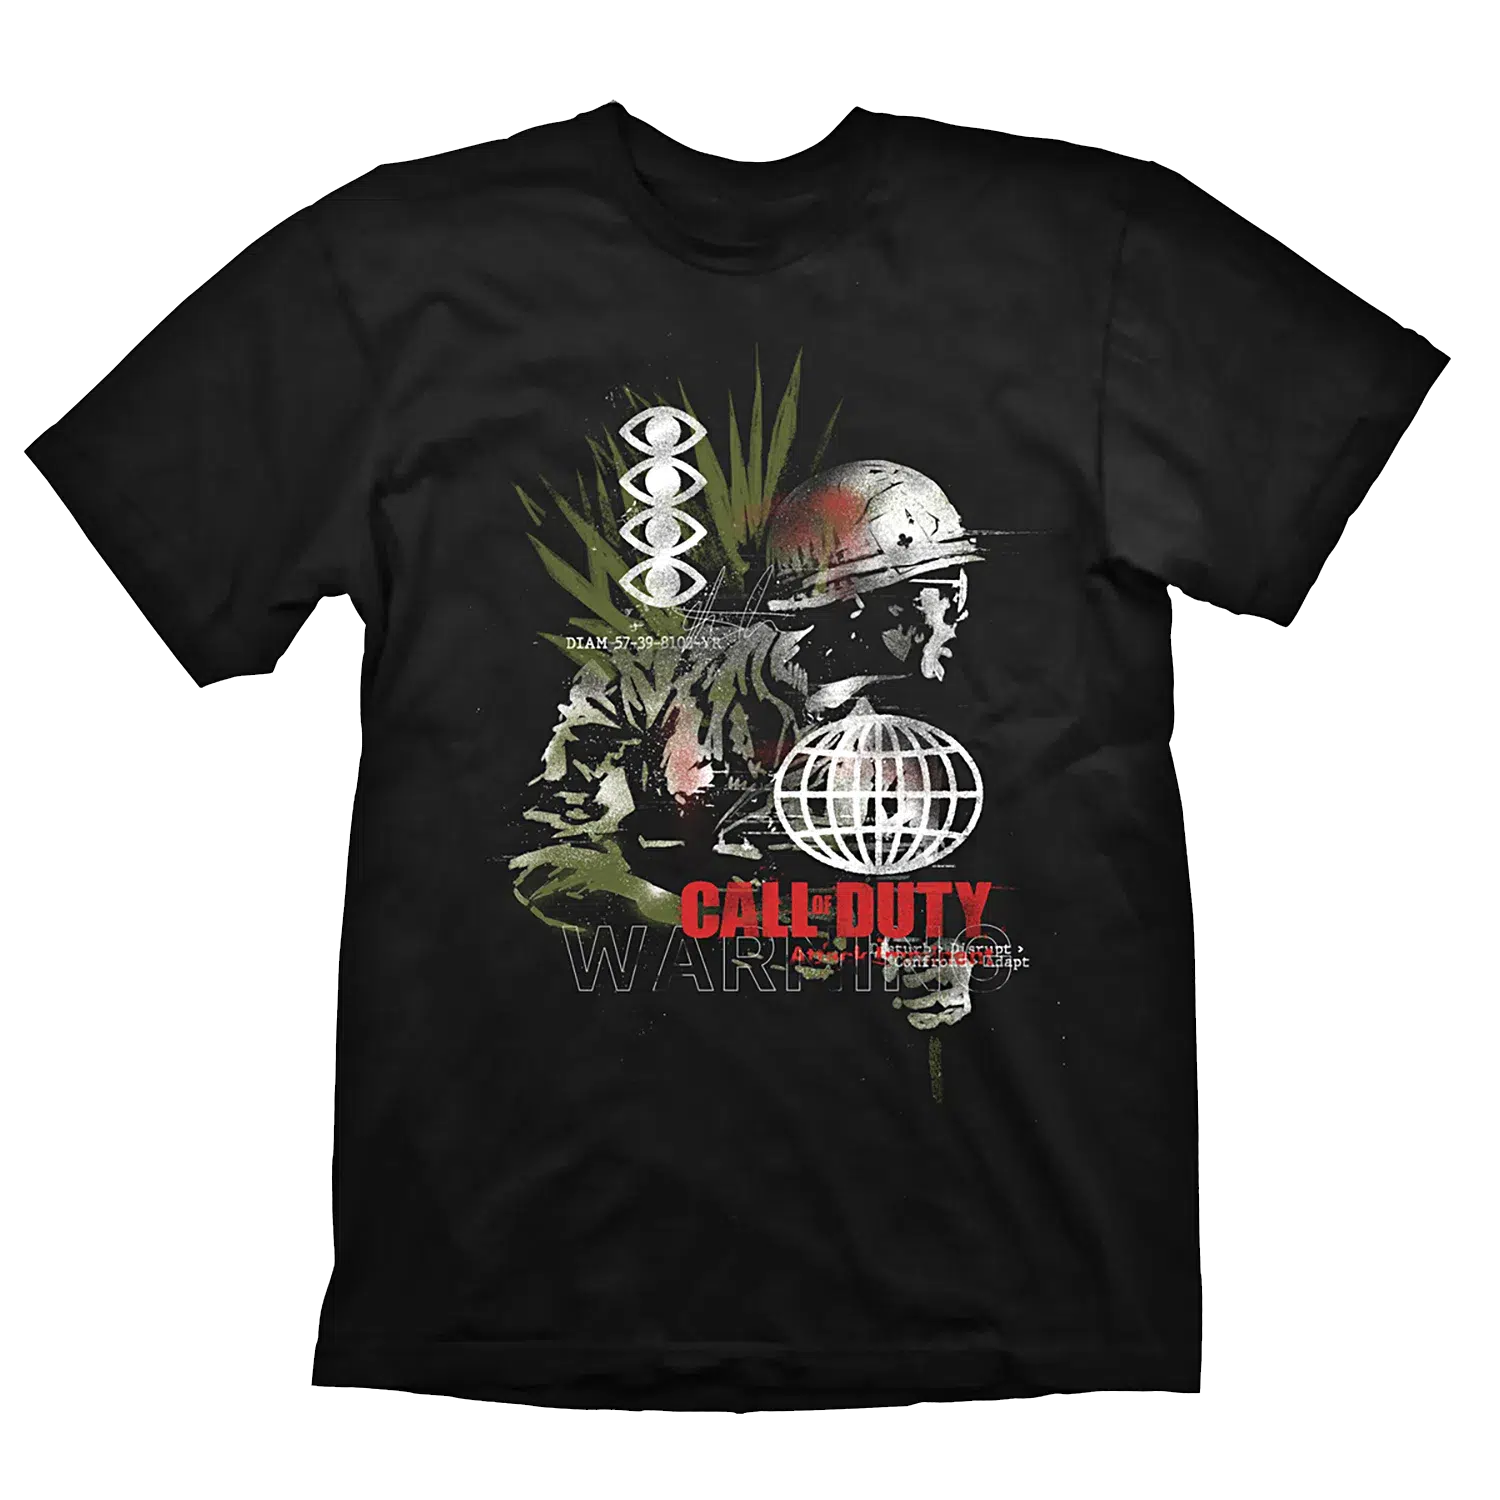 Call of Duty: T-Shirt "Army Comp" Black